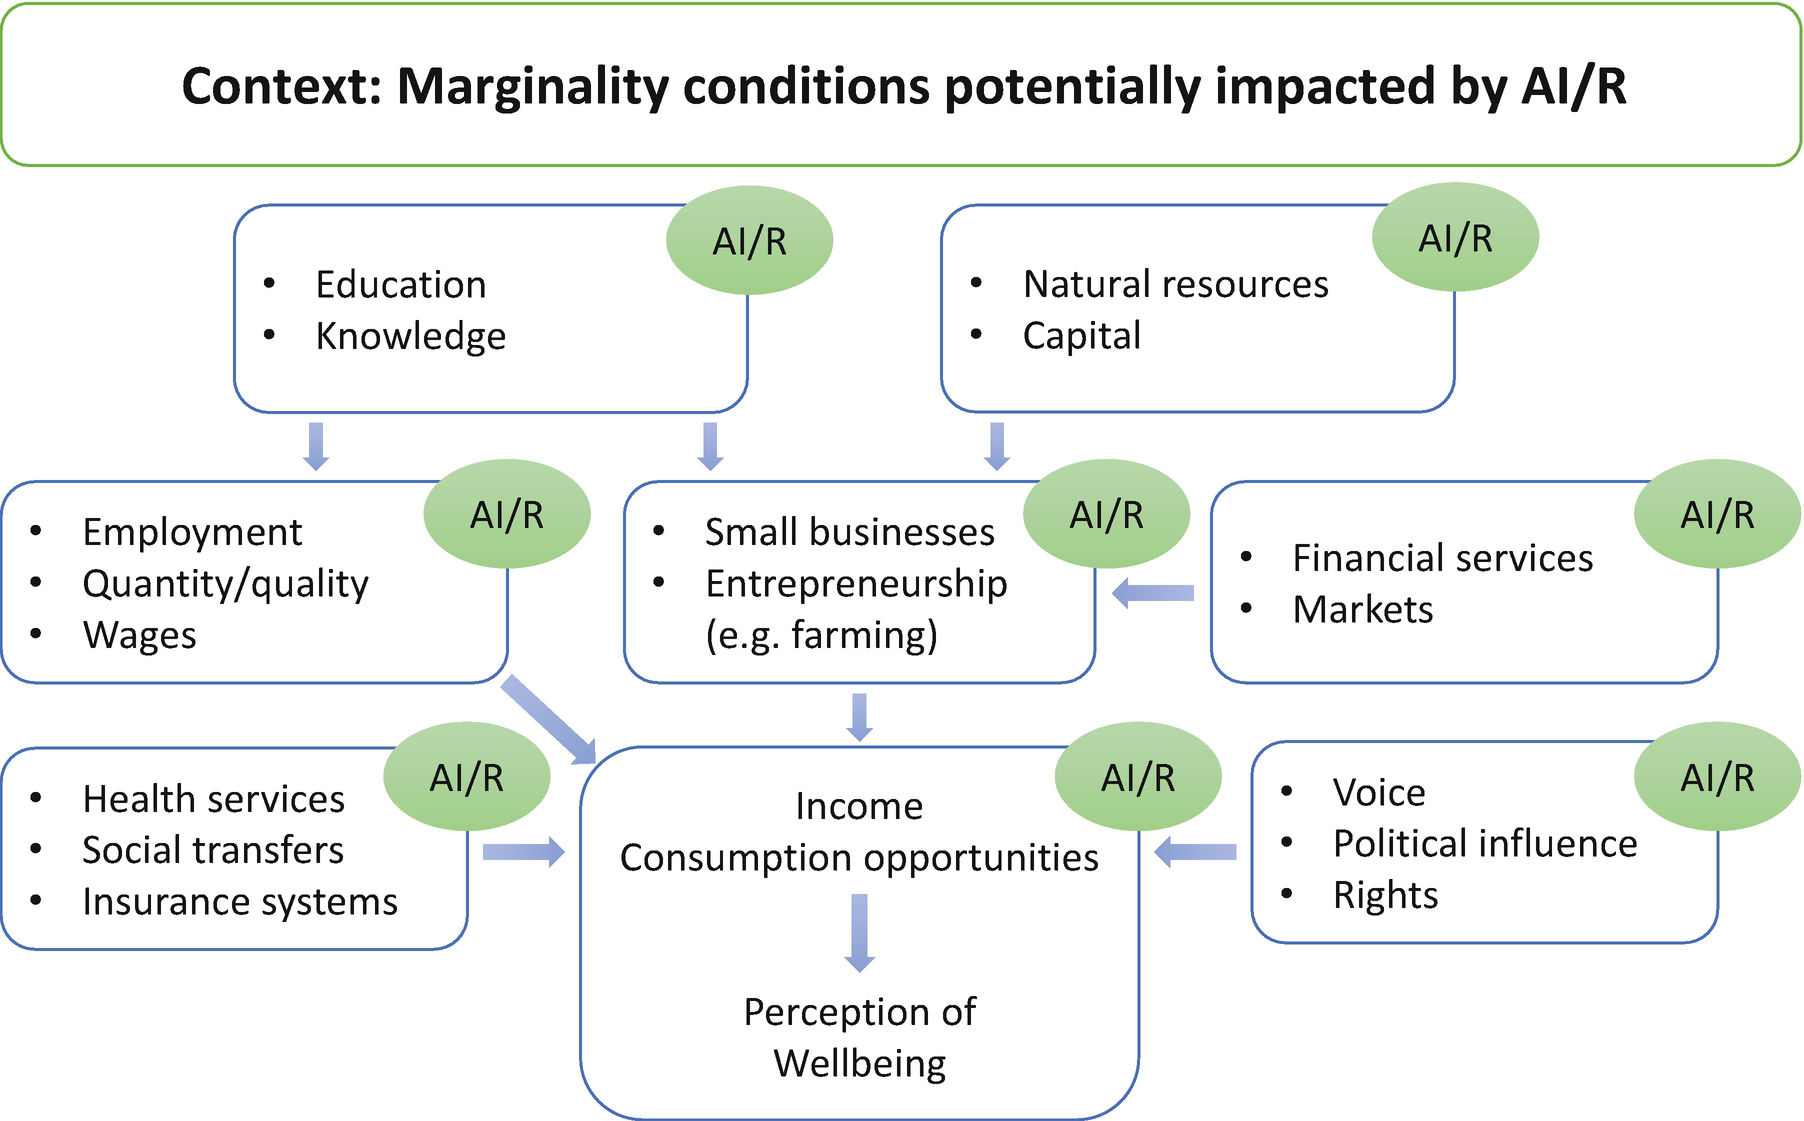 Marginality conditions potentially impacted by AI/R. ethical AI